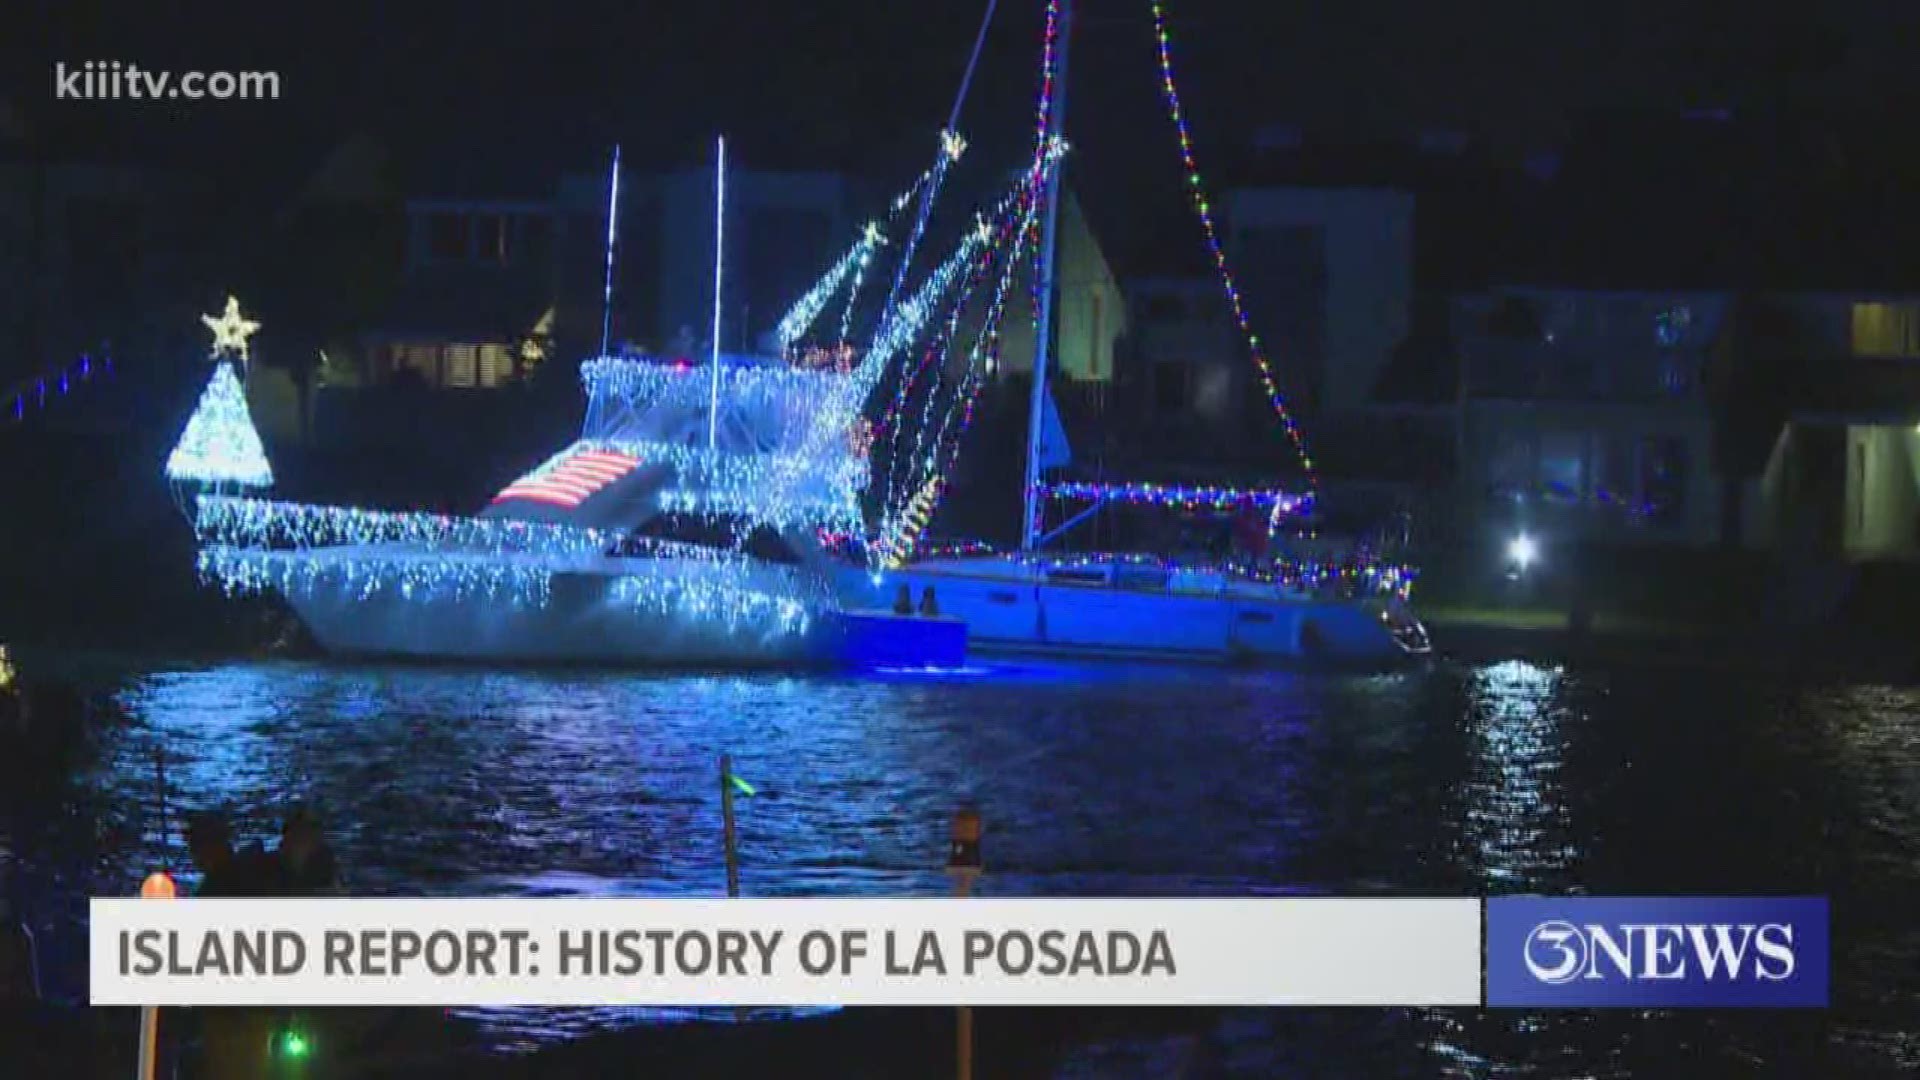 The IBC Bank La Posada Lighted Boat Parade kicks off this weekend on Padre Island for its 45th year.